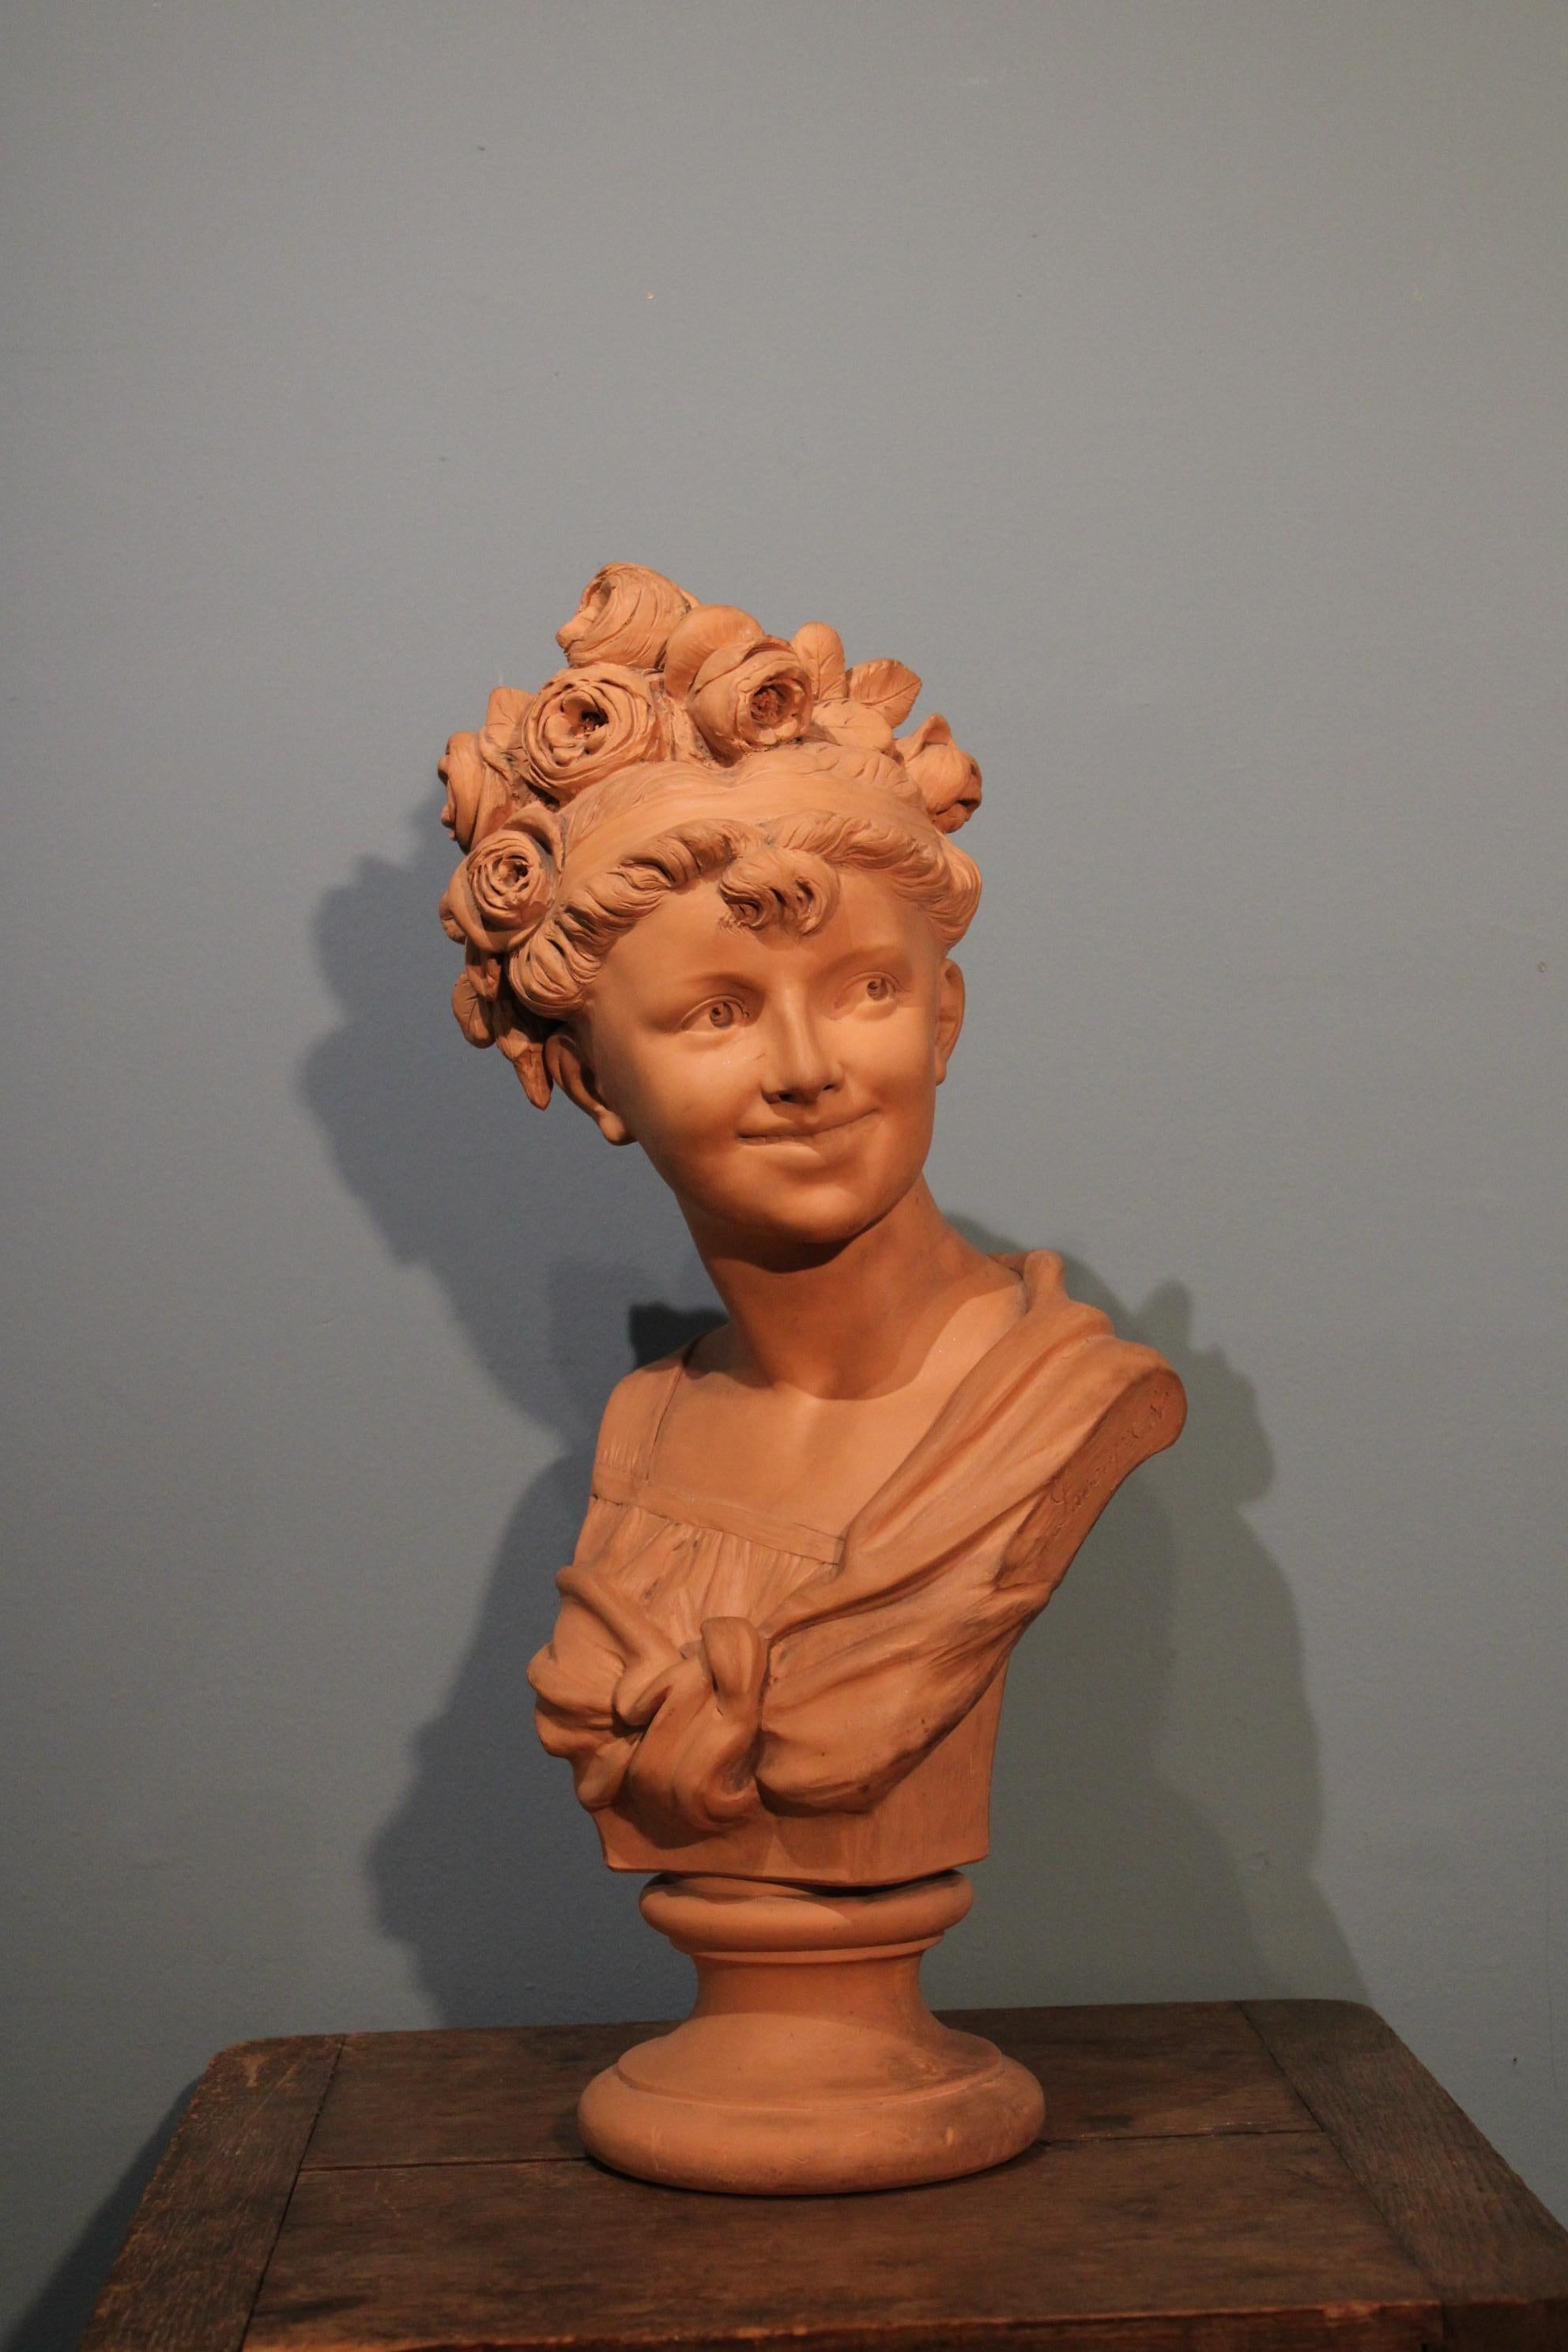 Terracotta bust by the French artist Adolphe-Jean Lavergne (1852-1901), signed.
19th century.